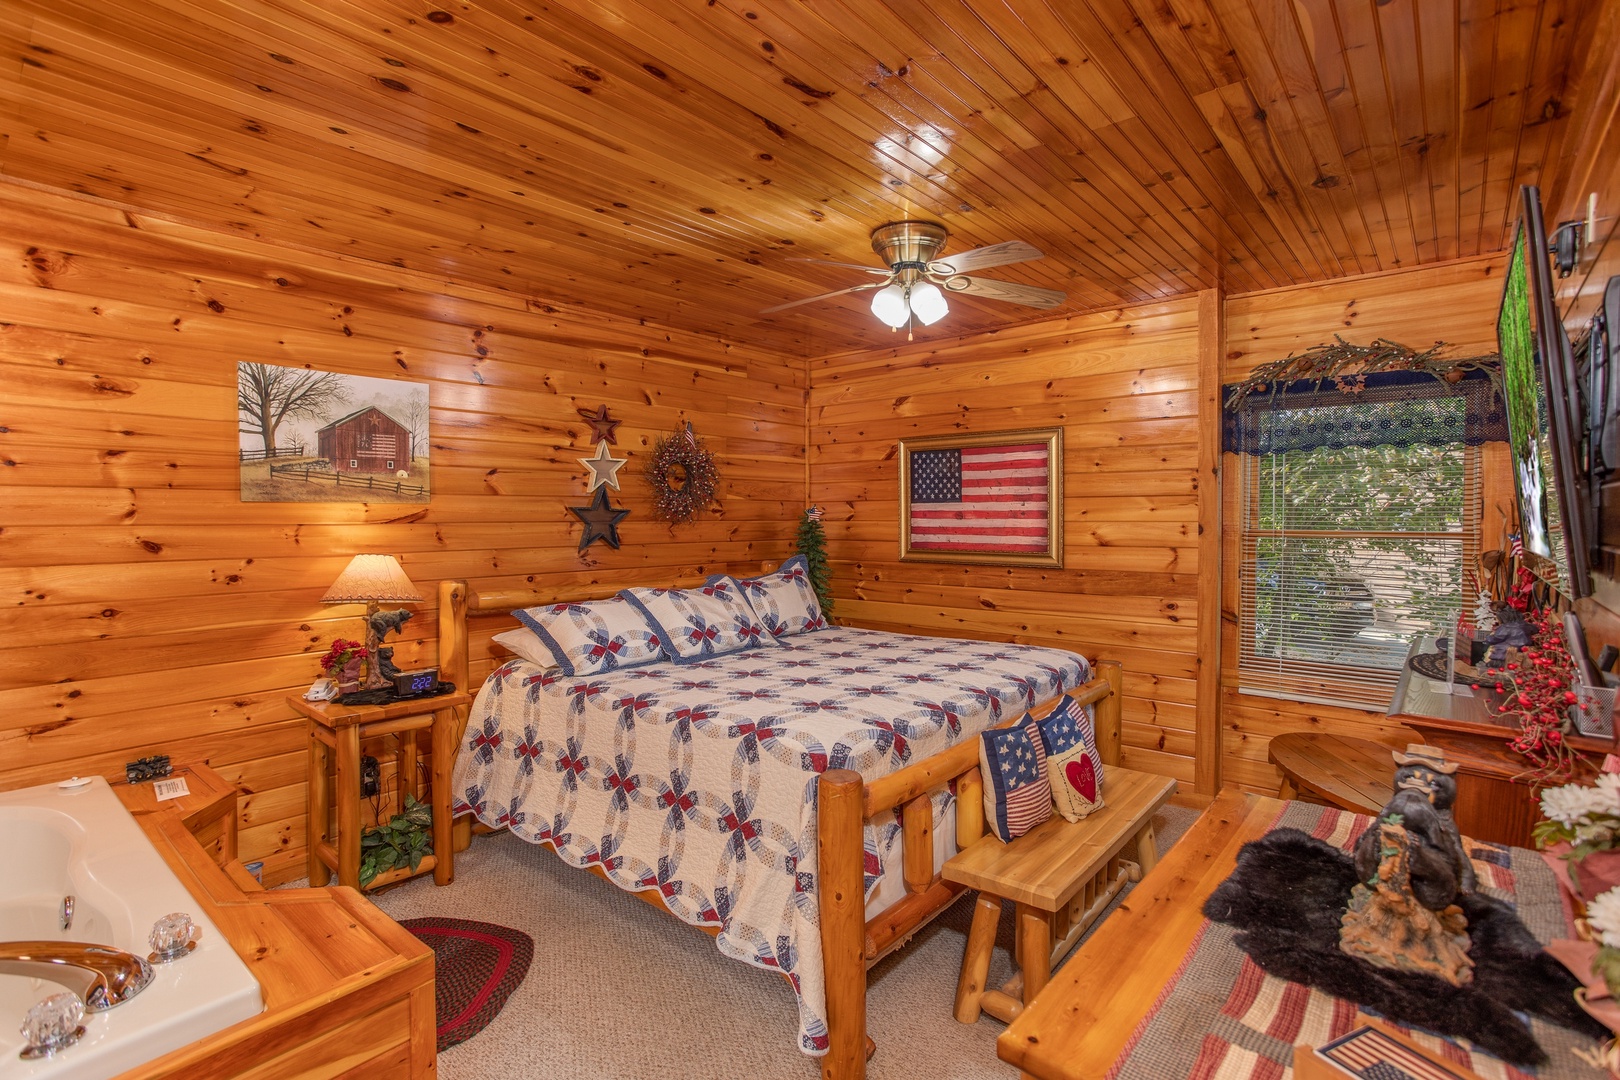 Bedroom with a king-sized log bed at Bear Country, a 3-bedroom cabin rental located in Pigeon Forge